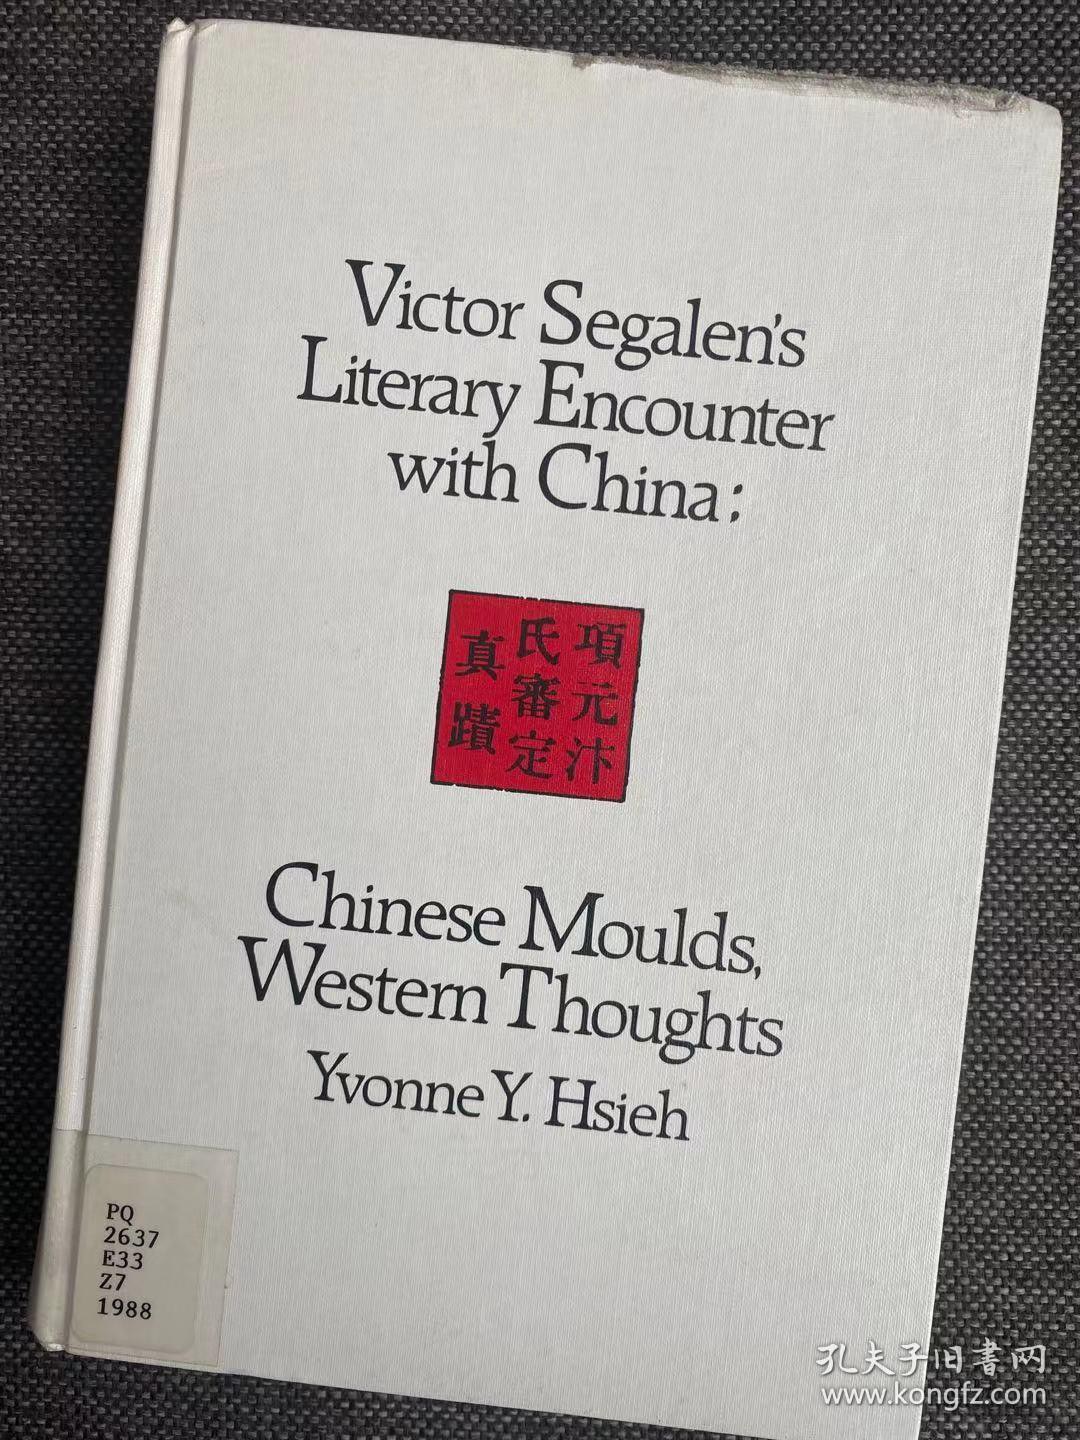 Victor Segalen's literary encounter with China Chinese moulds, Western thoughts